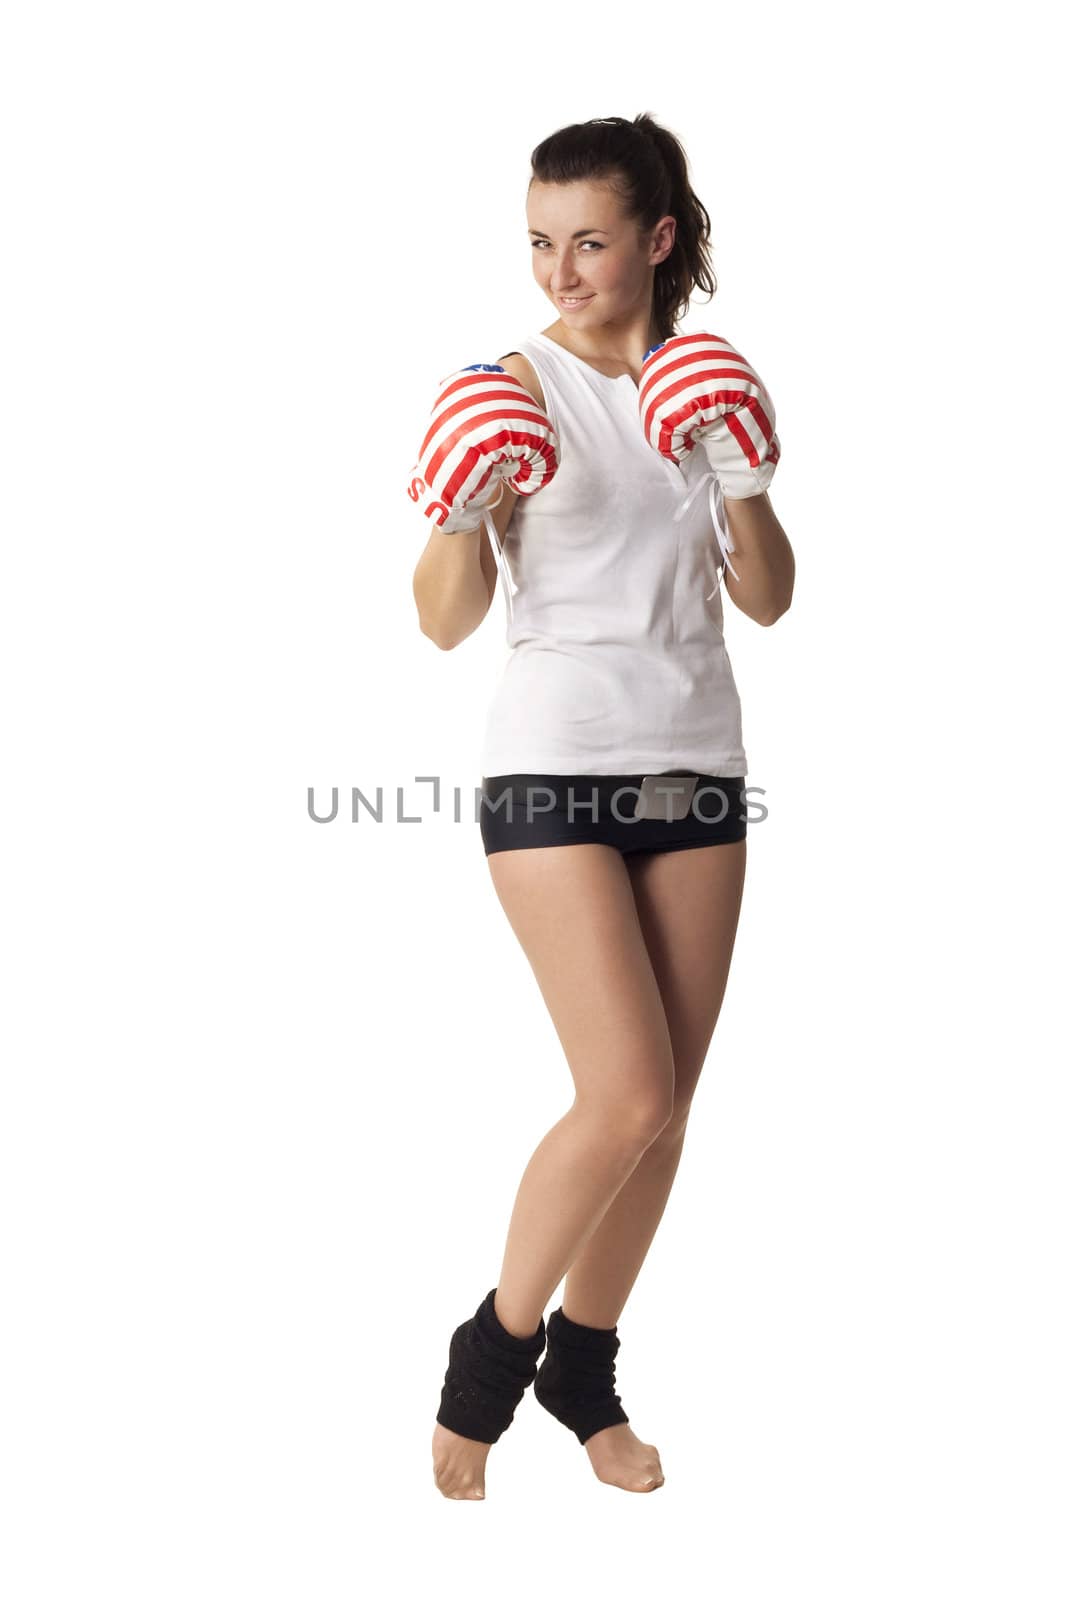 Model posing in a character of a boxer